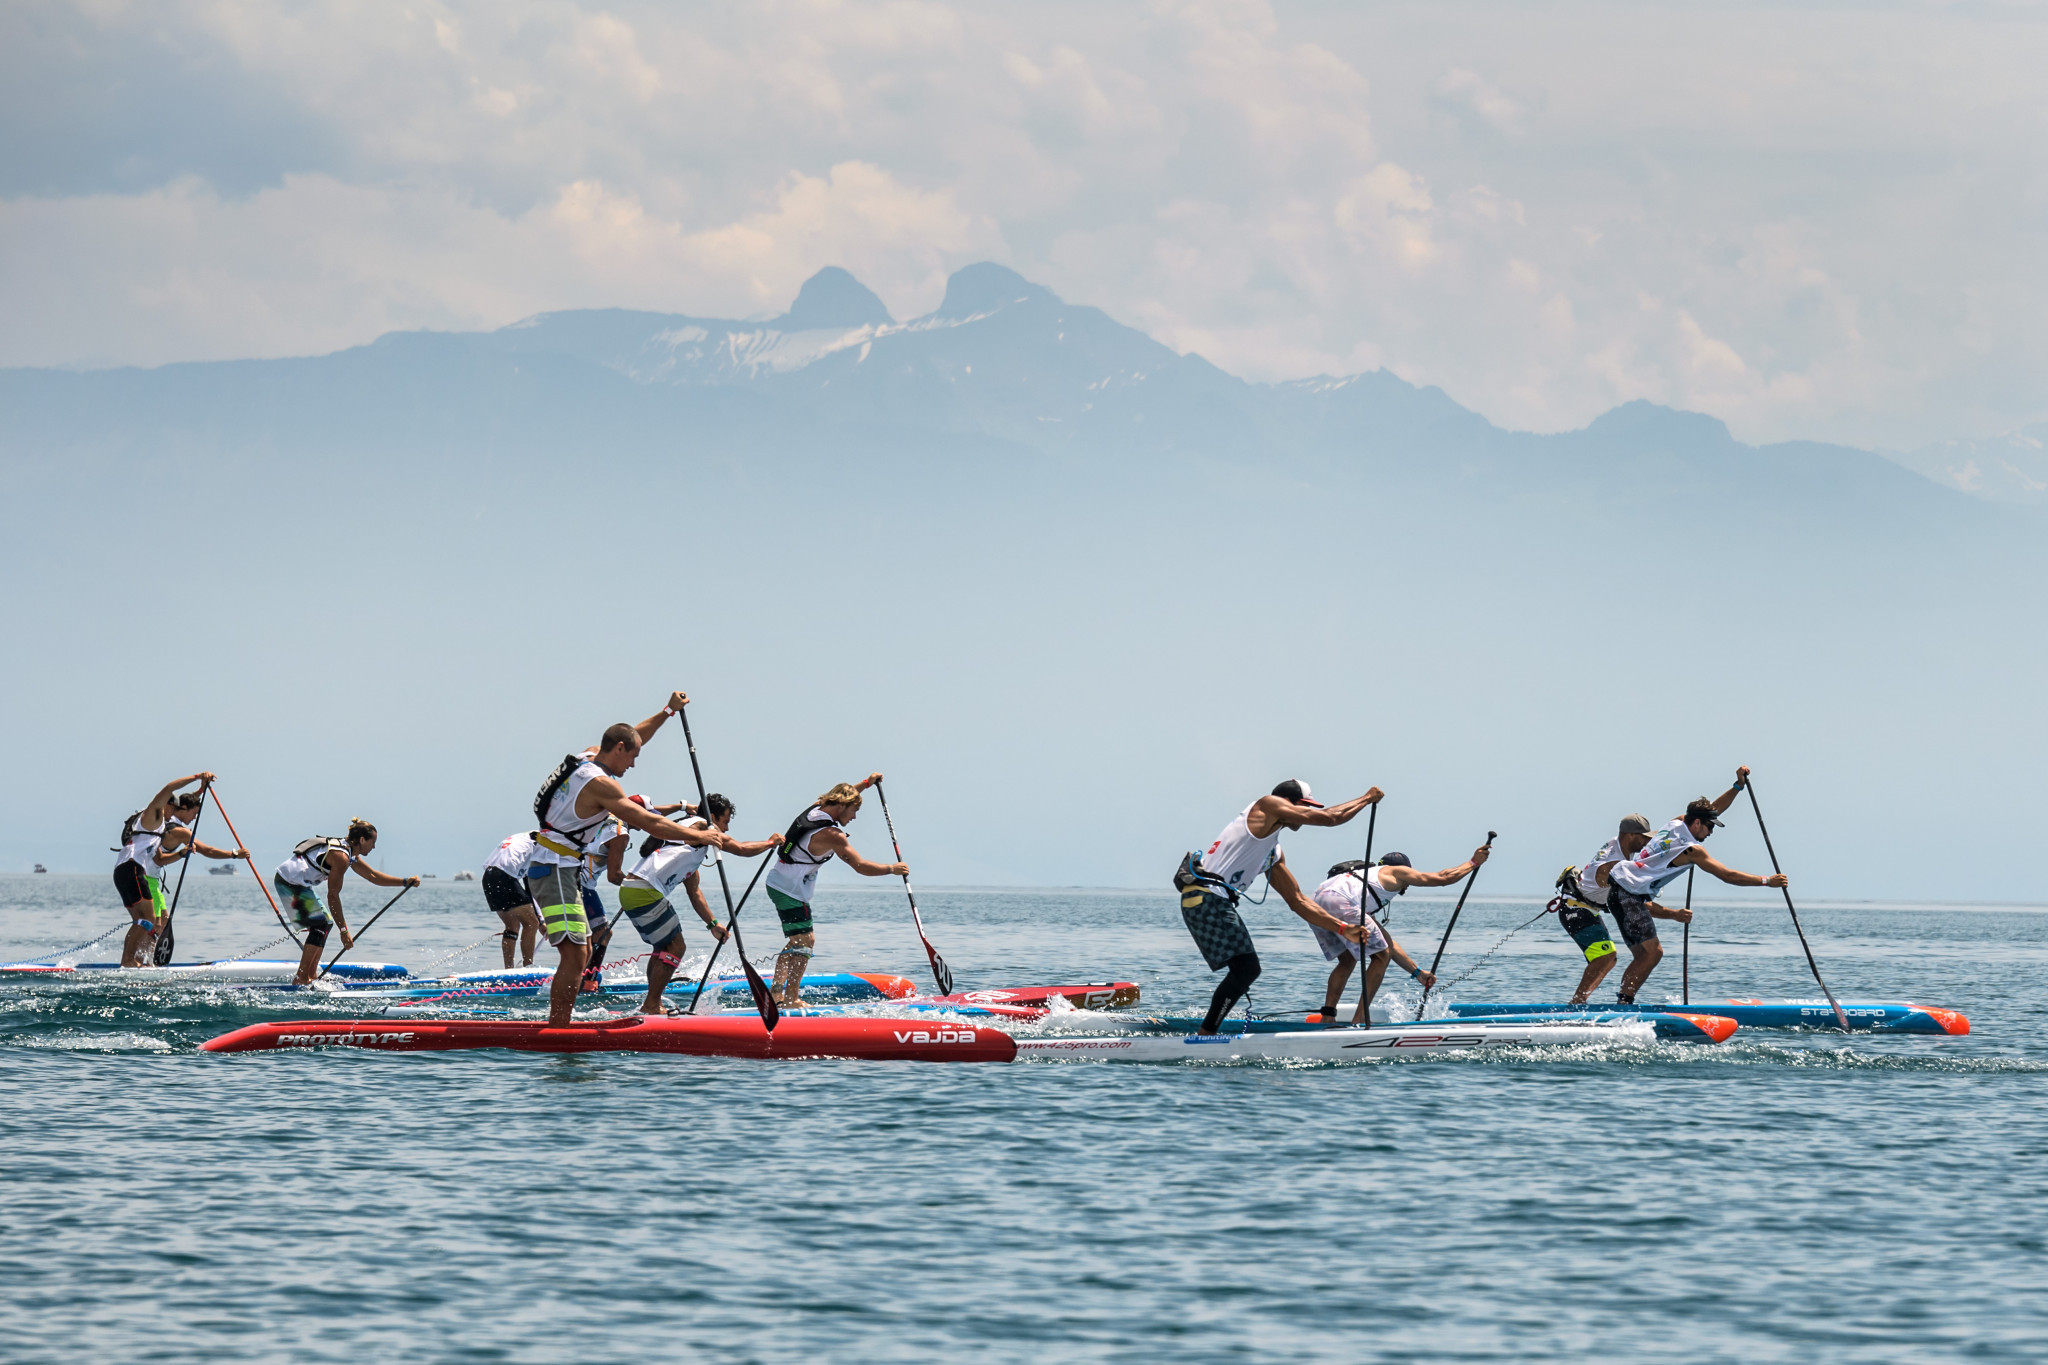 ICF announce plans to host 2019 Stand-Up Paddleboard World Championships in decision which will anger ISA